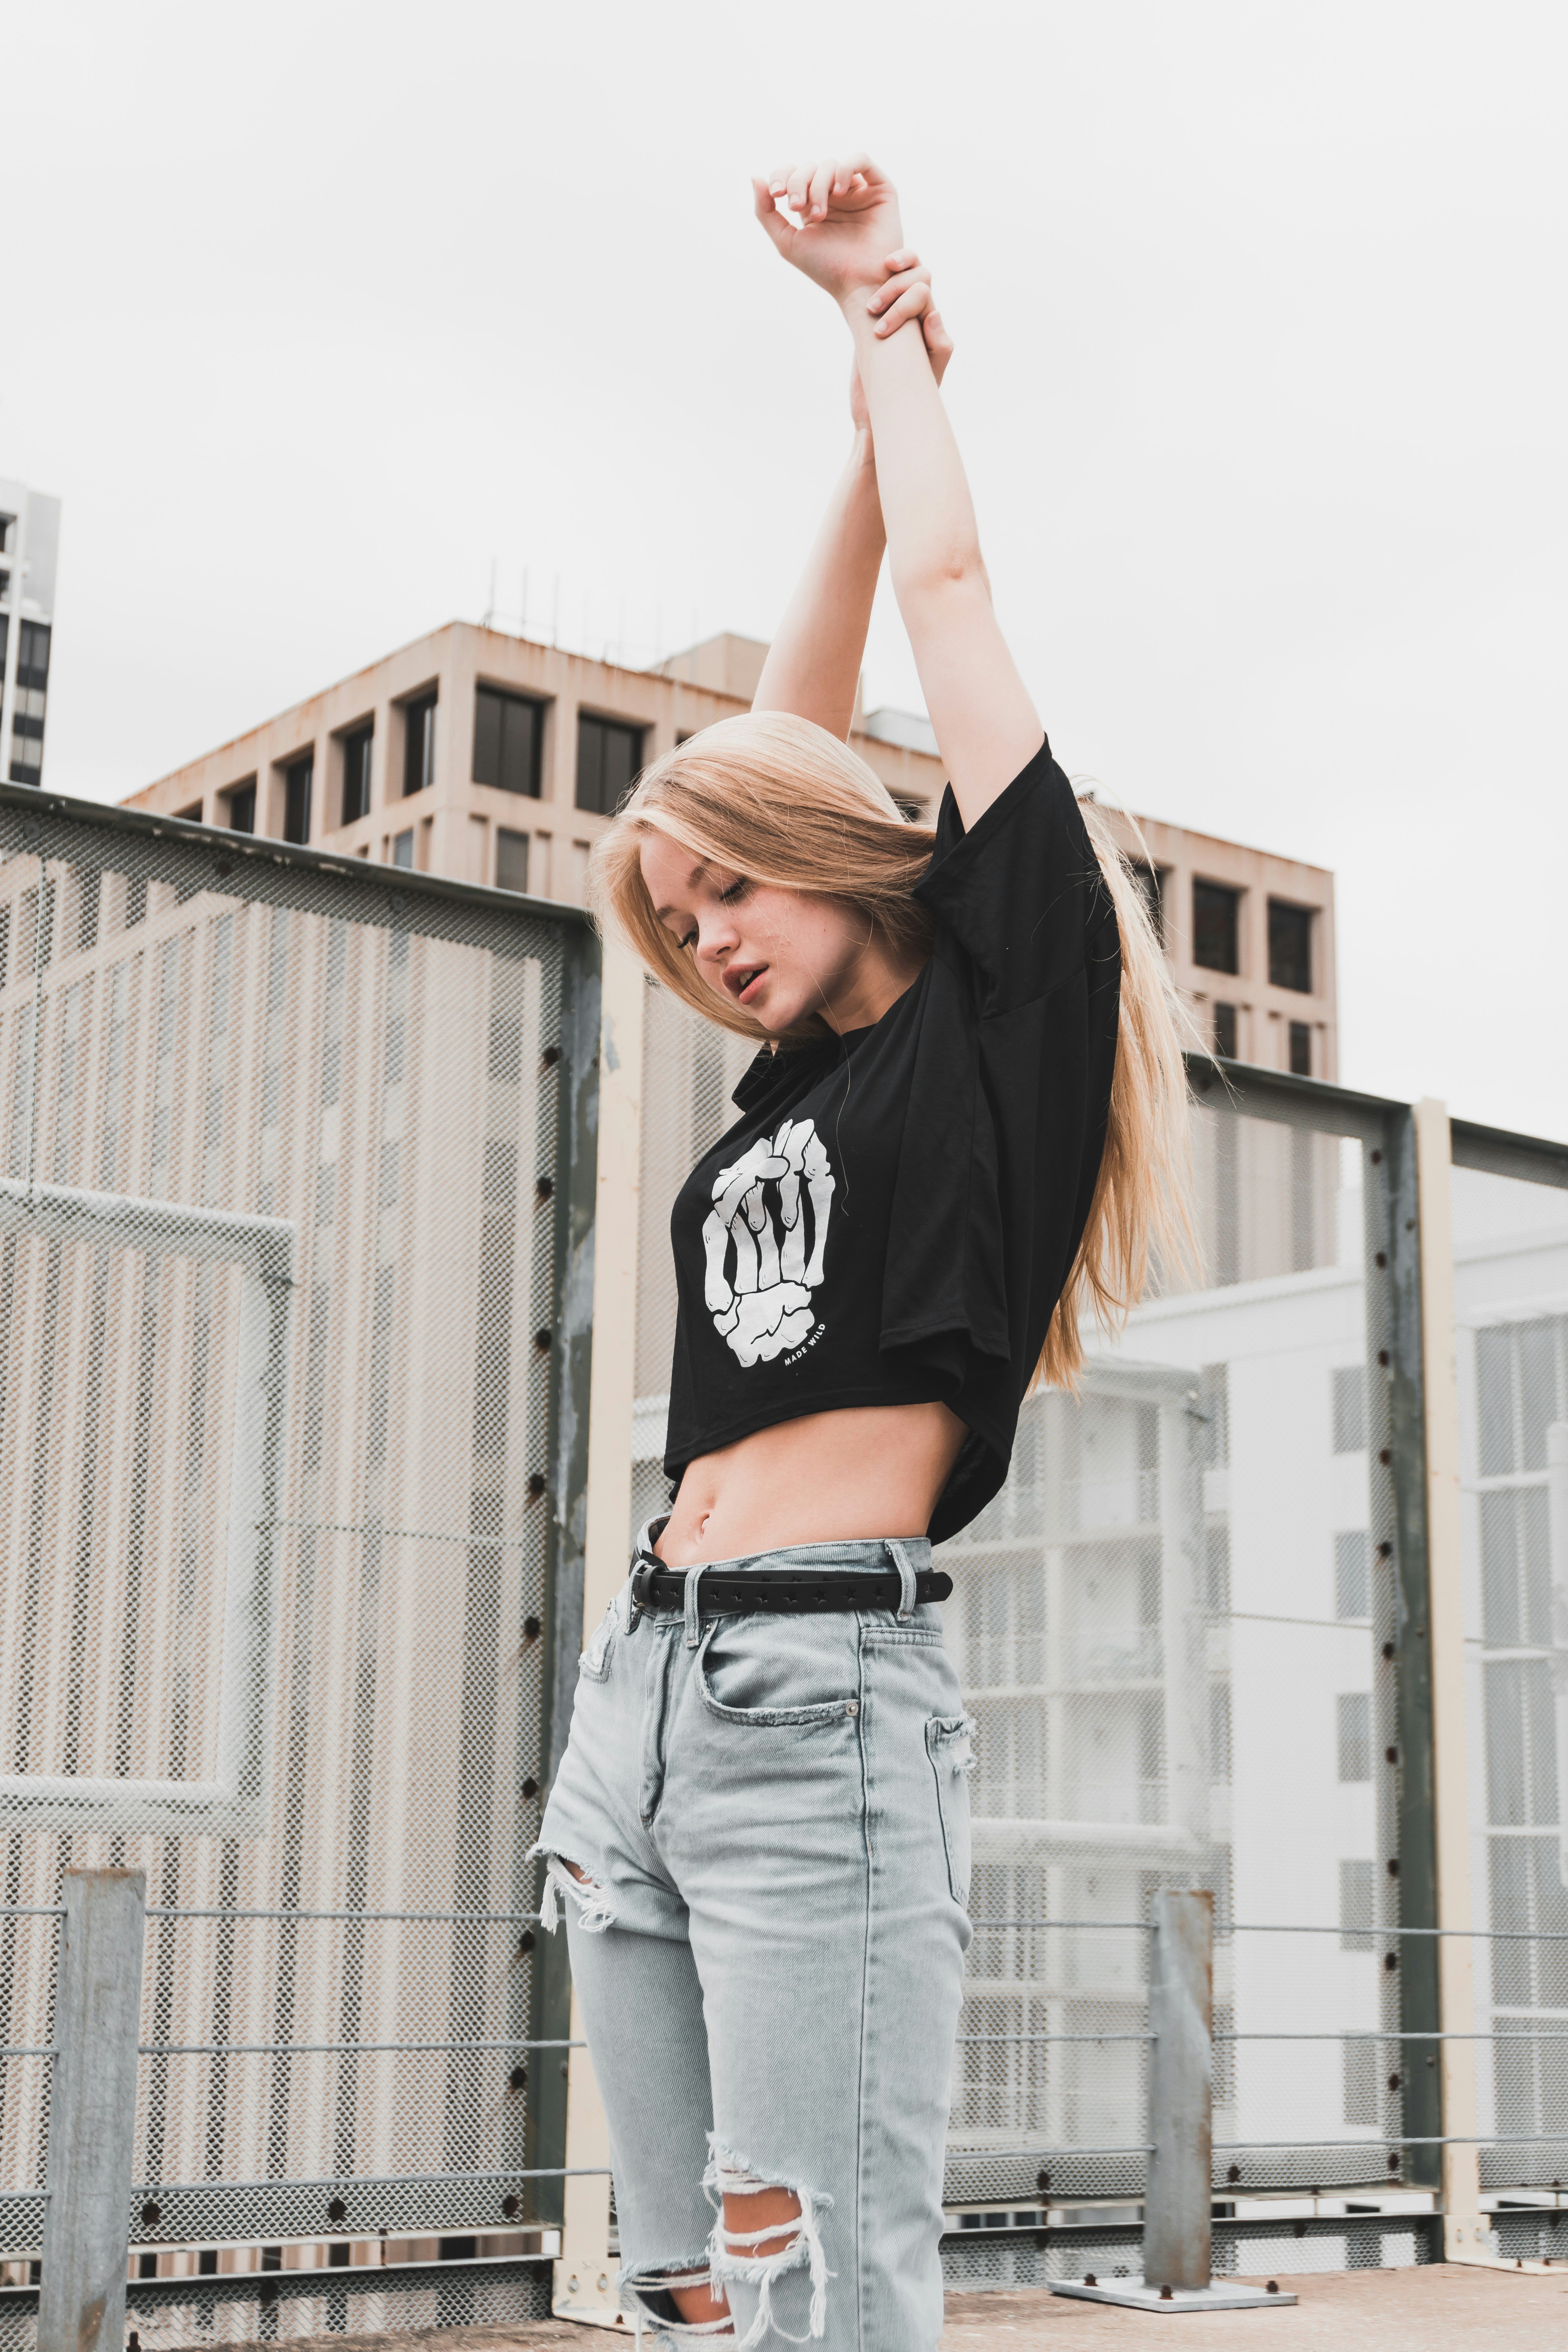 How to Wear a Crop Top in 6 Different Styles